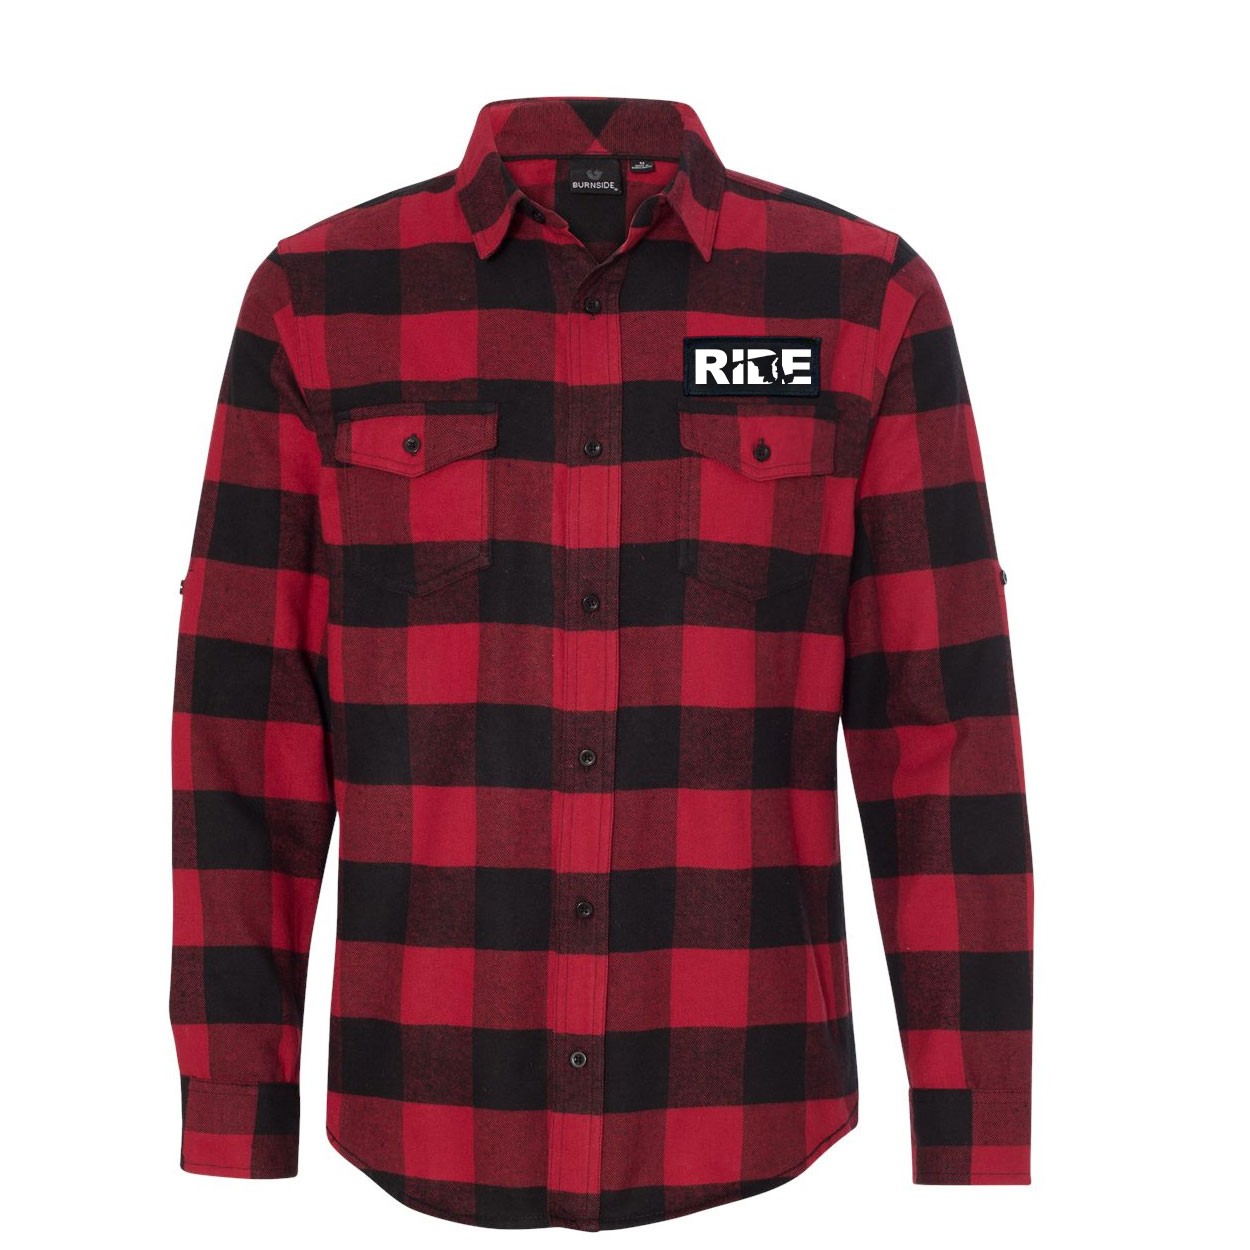 Ride Maryland Classic Unisex Long Sleeve Woven Patch Flannel Shirt Red/Black Buffalo (White Logo)